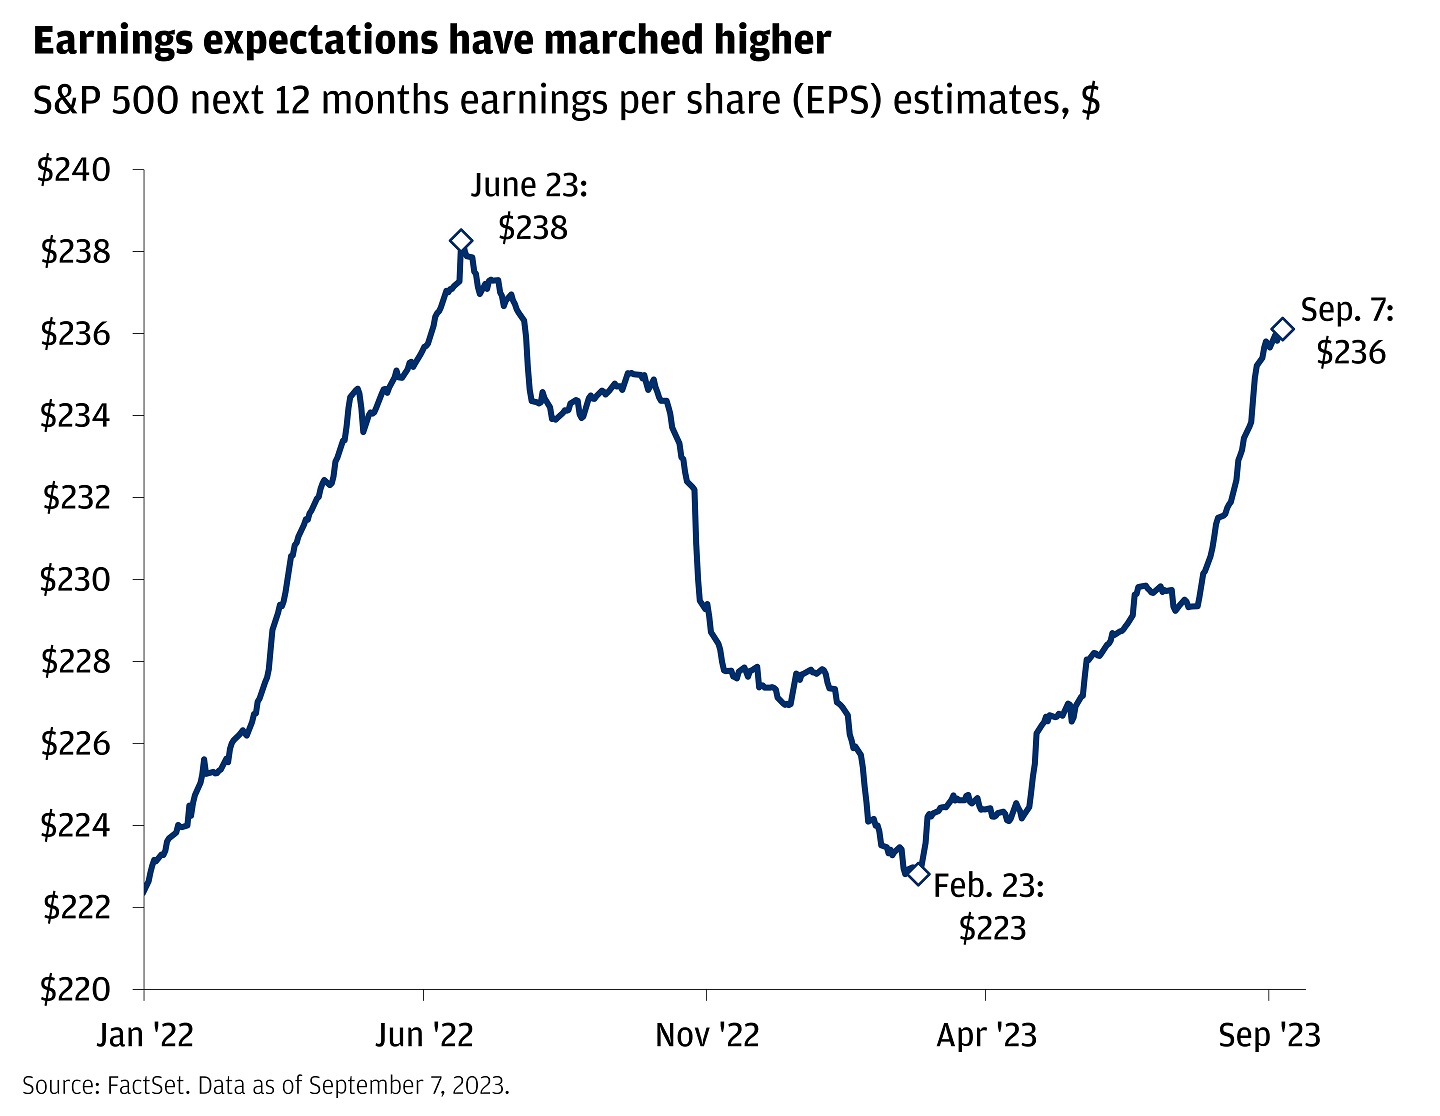 The chart describes the S&P 500 next 12 months earnings per share (EPS) estimates in money.